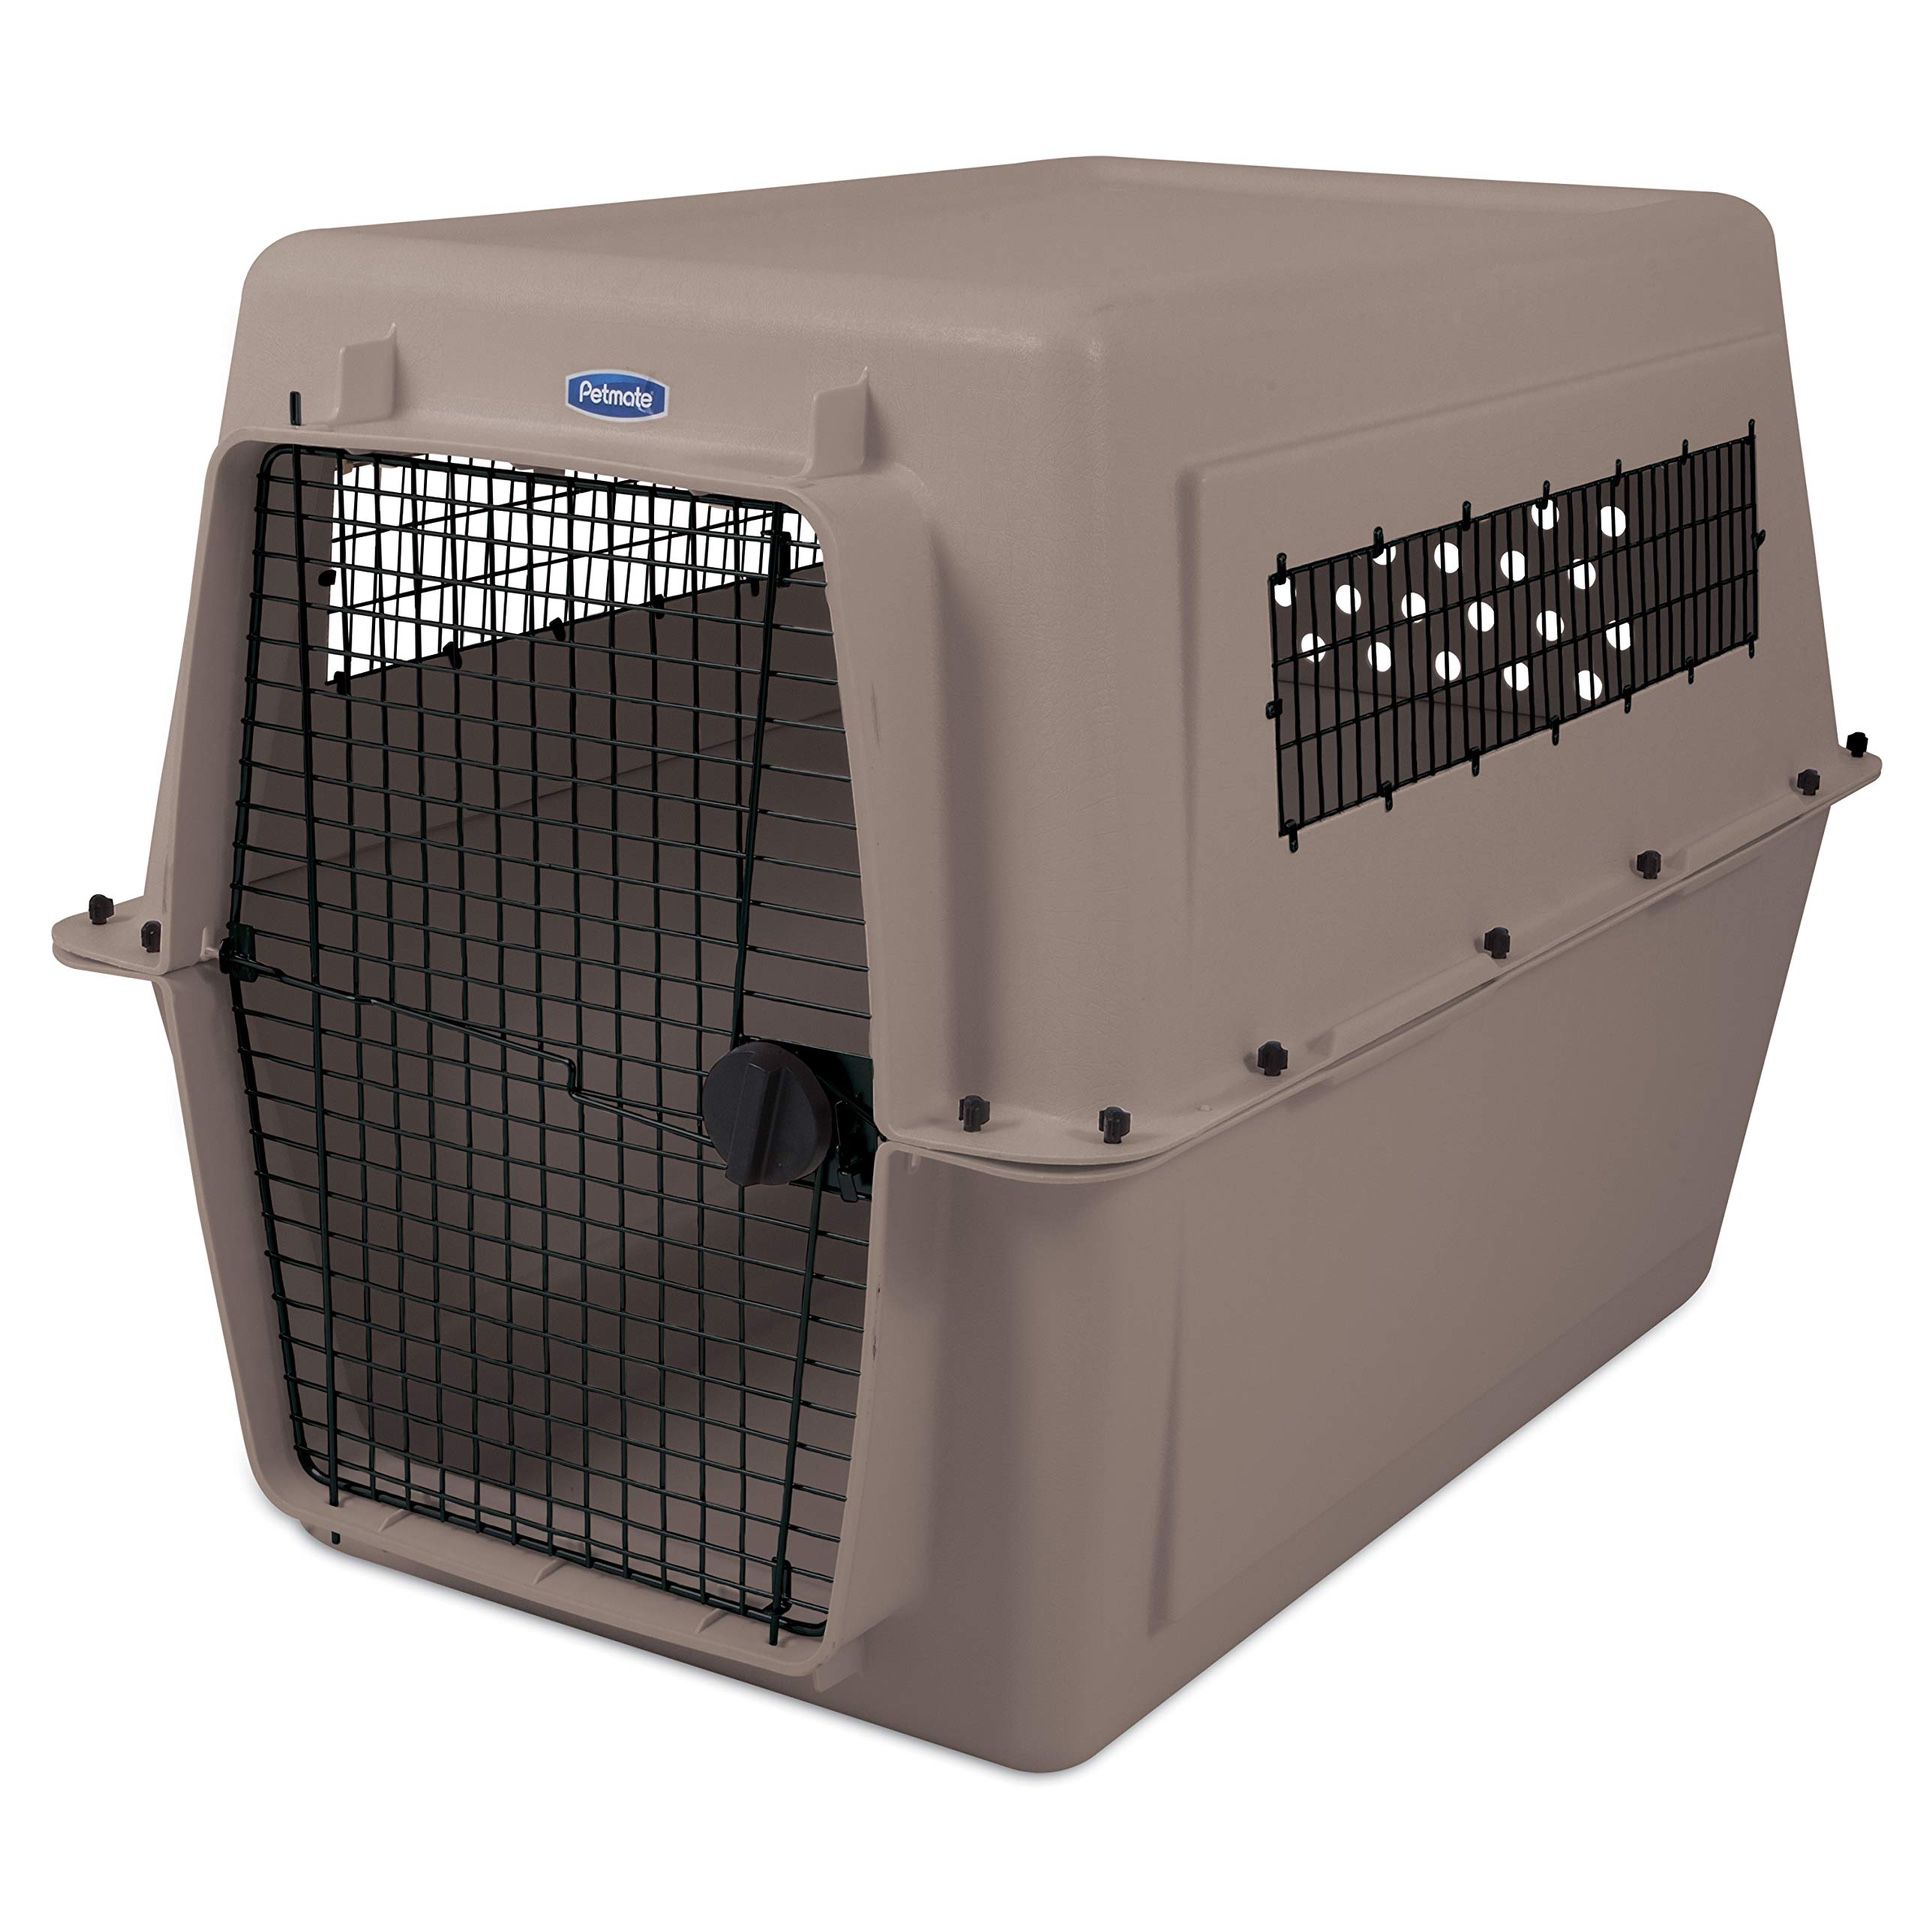 Petmate Ultra Vari Dog Kennel for Extra Large Dogs (Durable, Heavy Duty Dog Travel Crate 48 in. Long 90 to 125 lbs